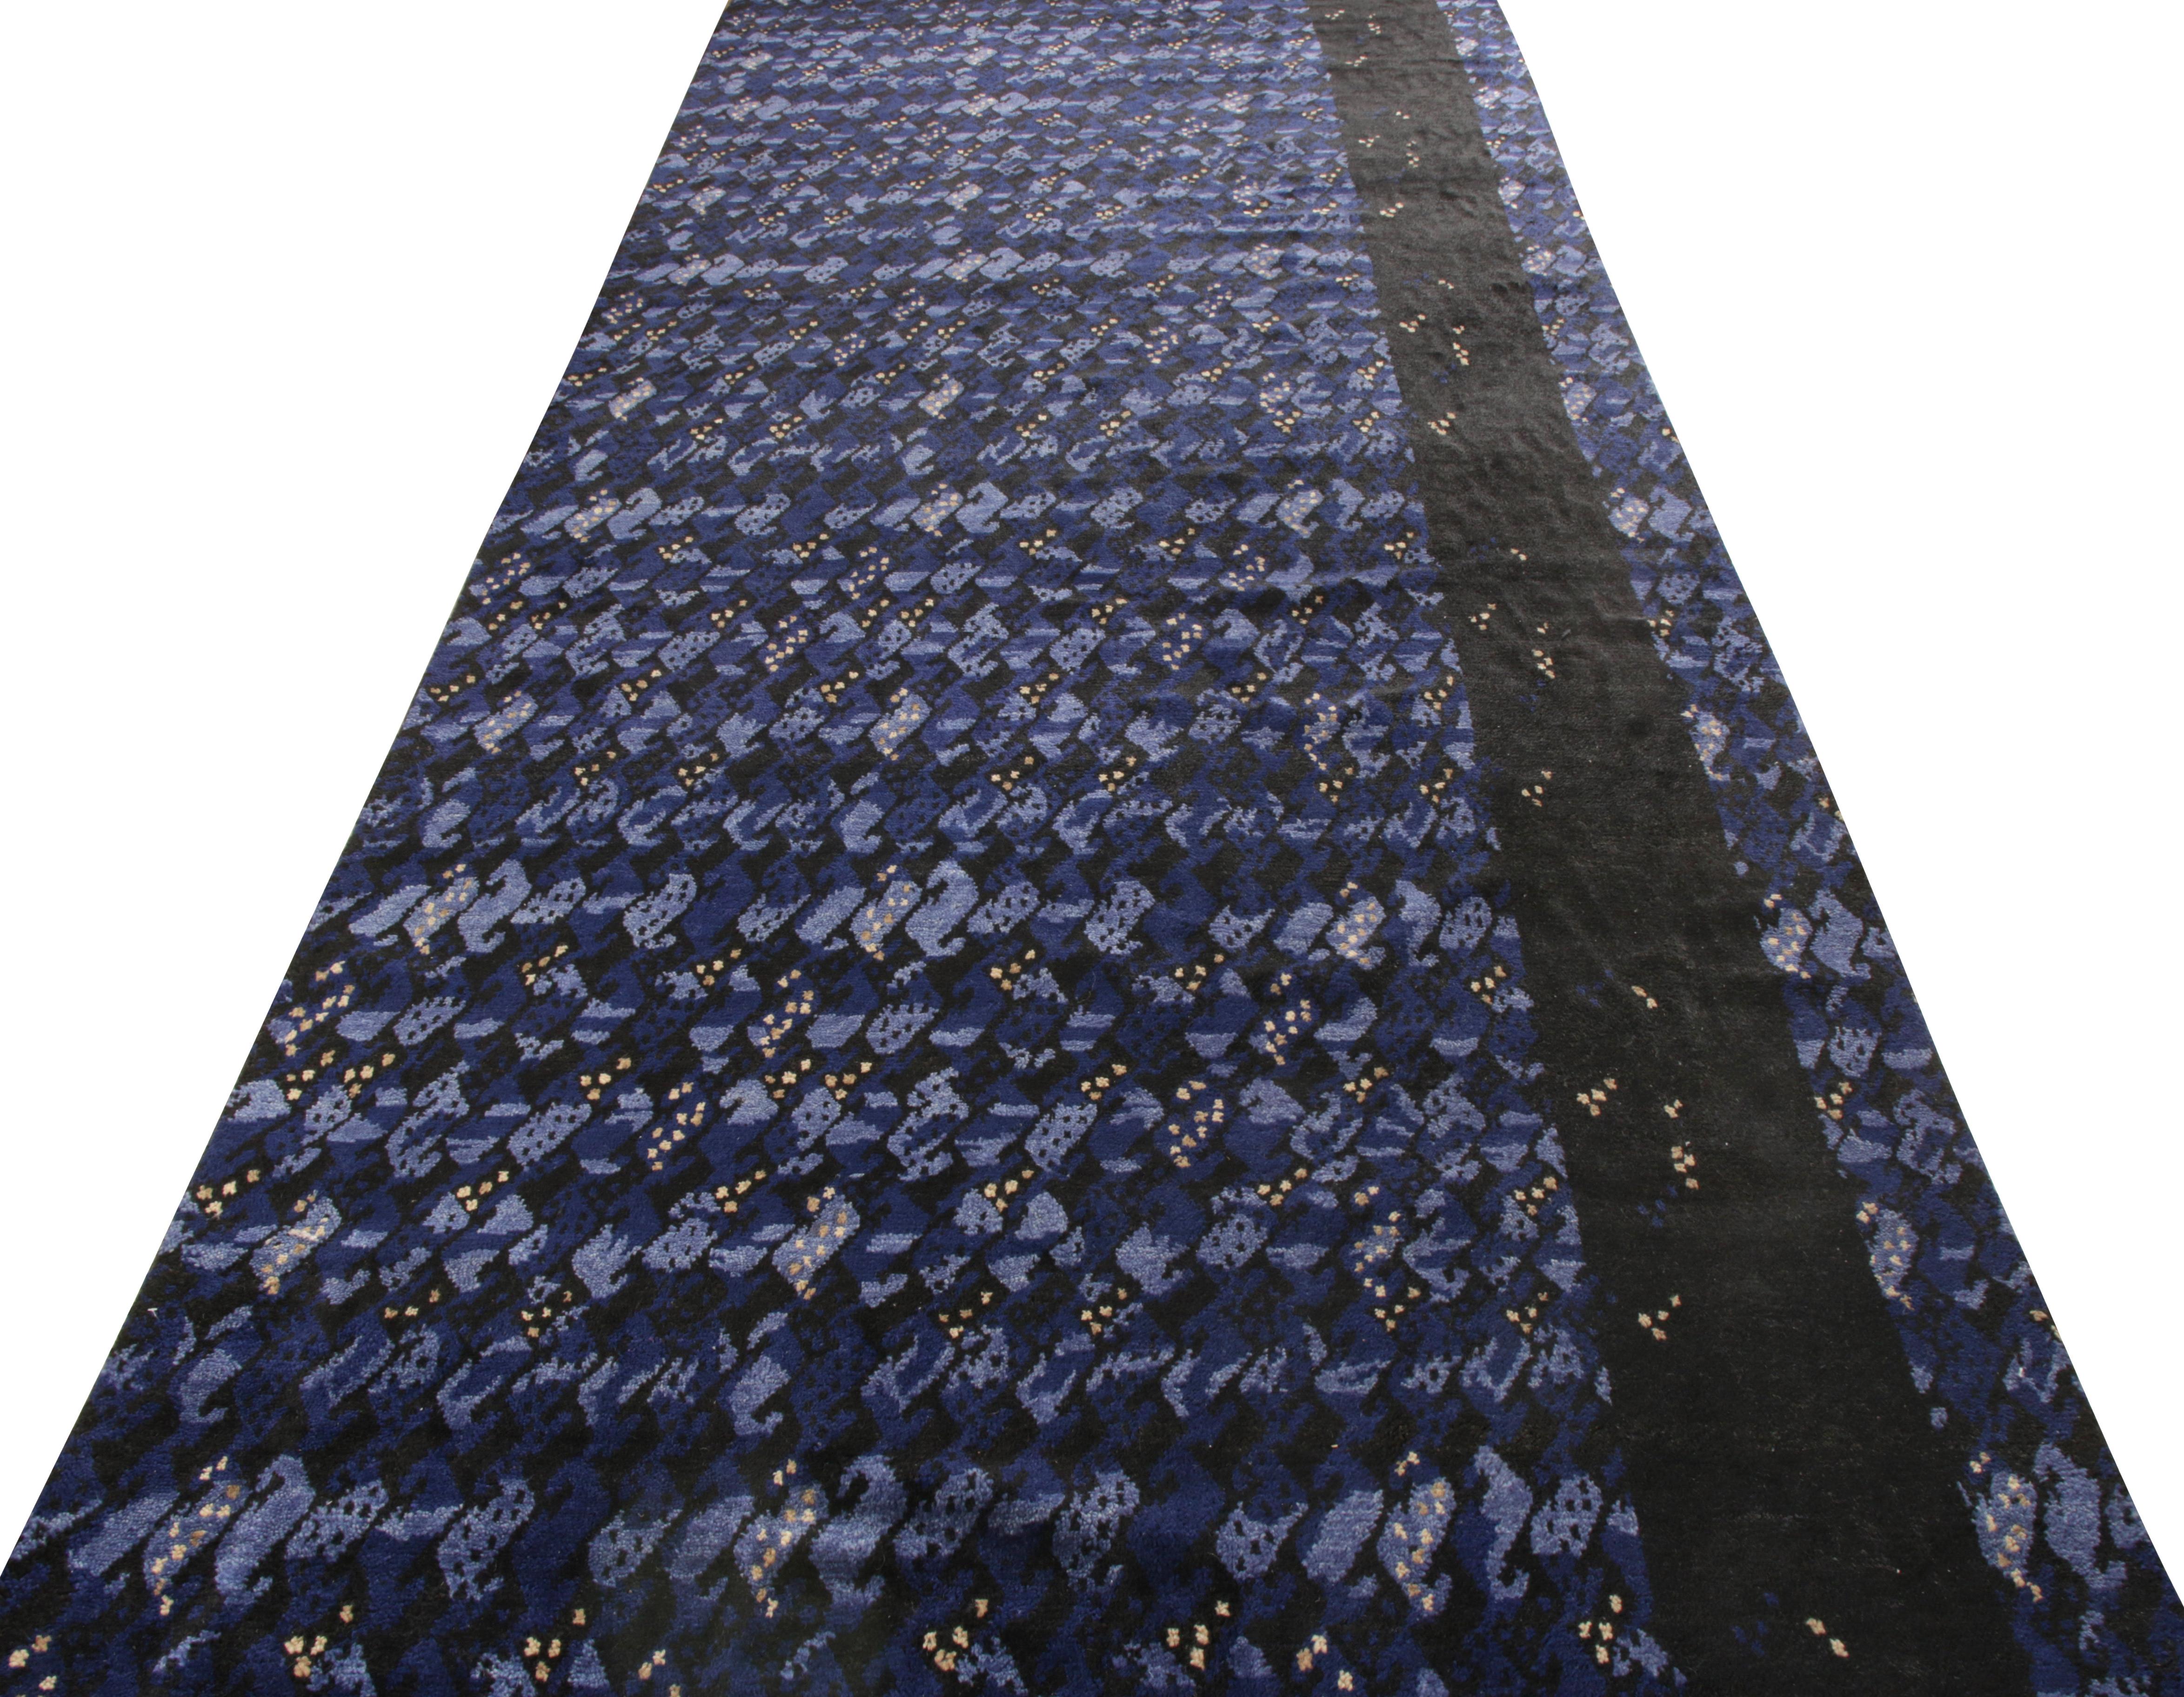 A 6 x 16 rug from Rug & Kilim’s Scandinavian pile line, reinstating the textural sensibilities of Swedish Modernism With a repetitive geometric pattern prevailing in hues of blue and black lending an enticing sense of movement. Hand knotted in wool,